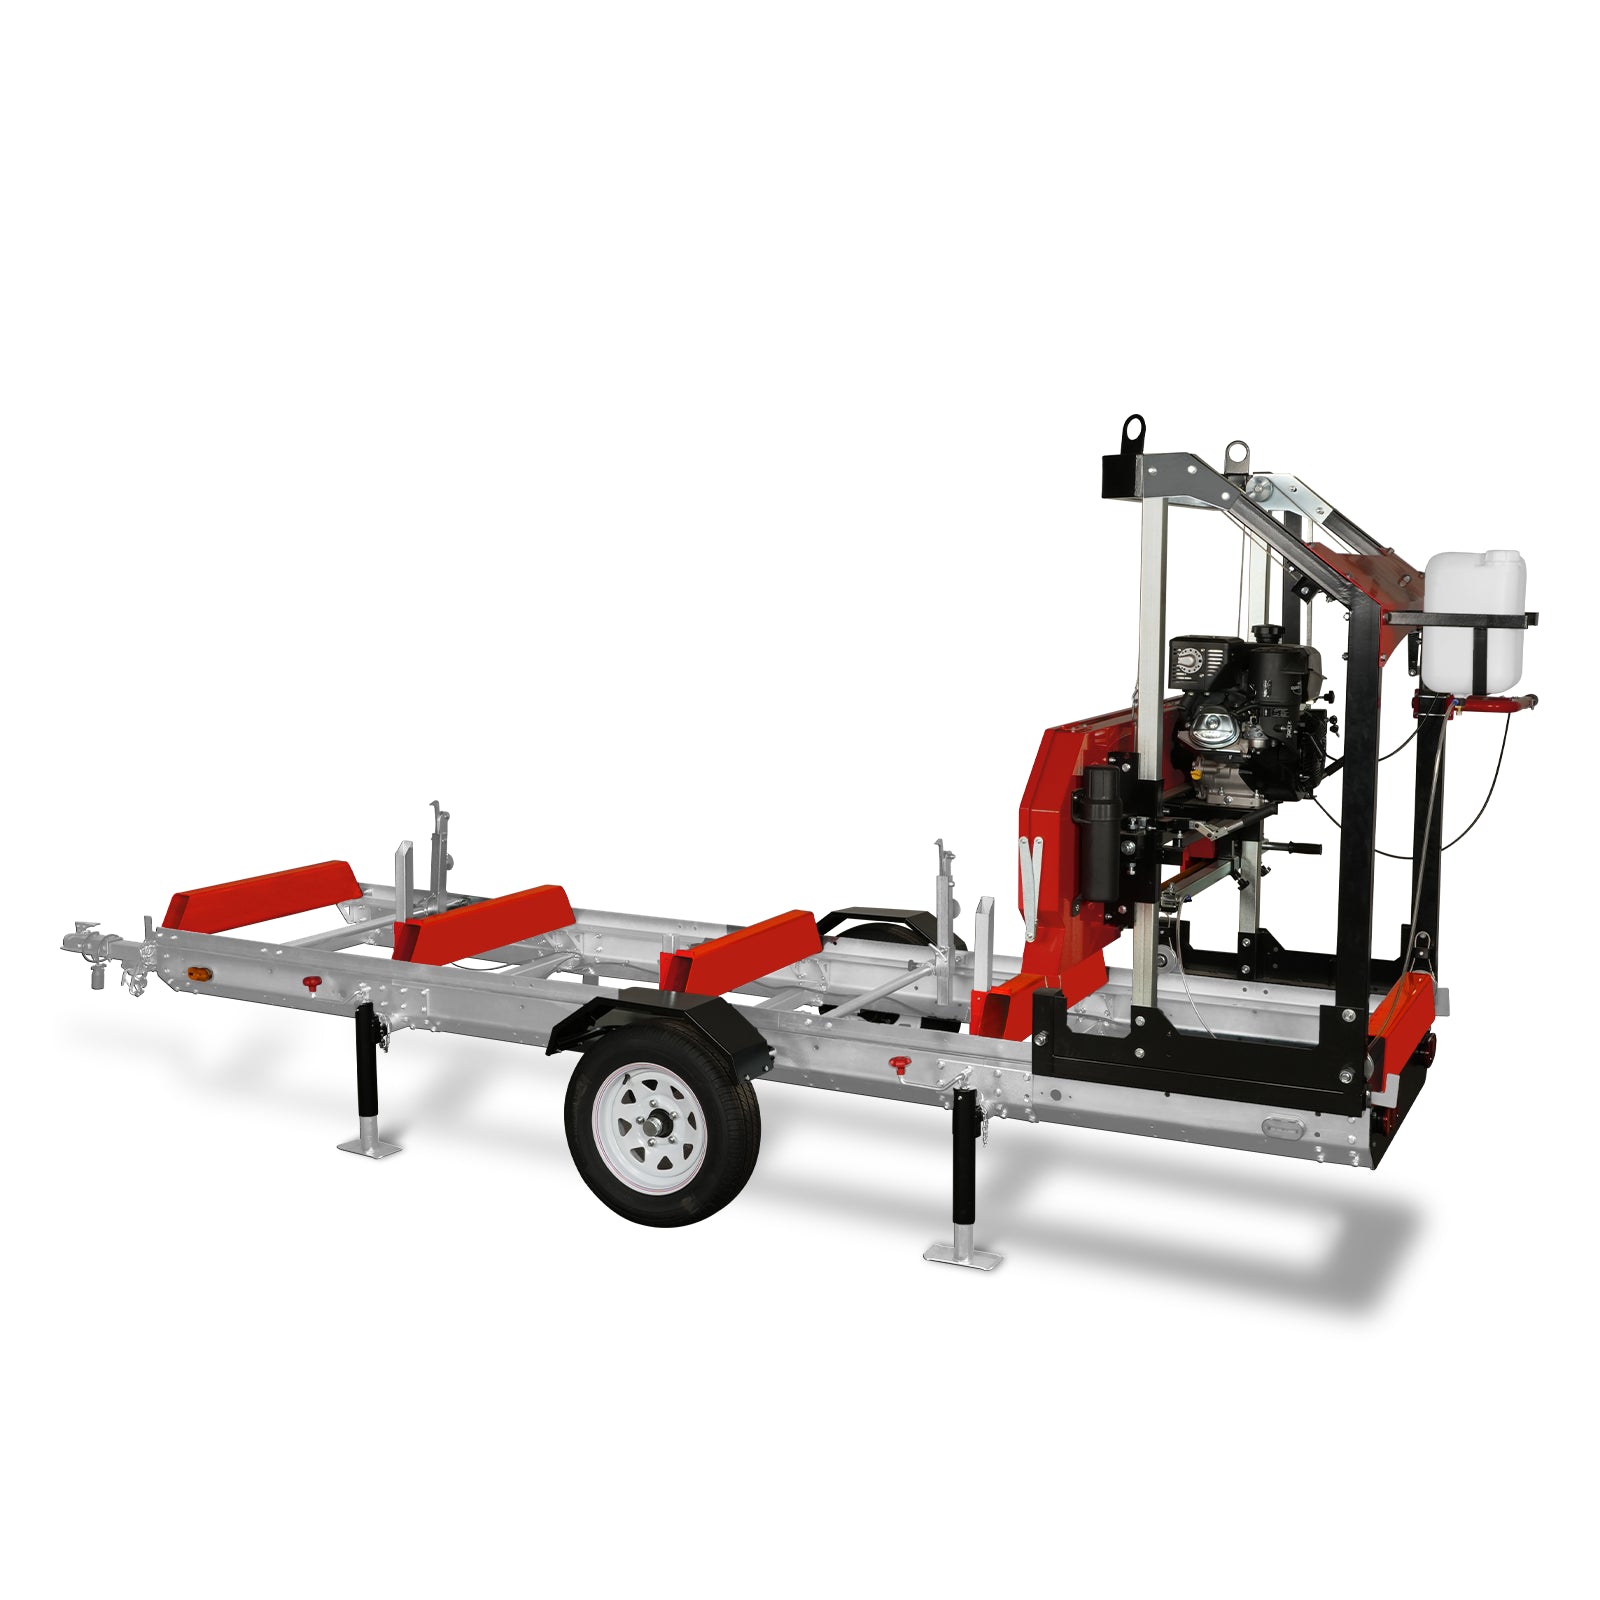 Primary Sub-Frame for Sawmill Trailer , 13' Track Length ( Compatible for SM-26 )